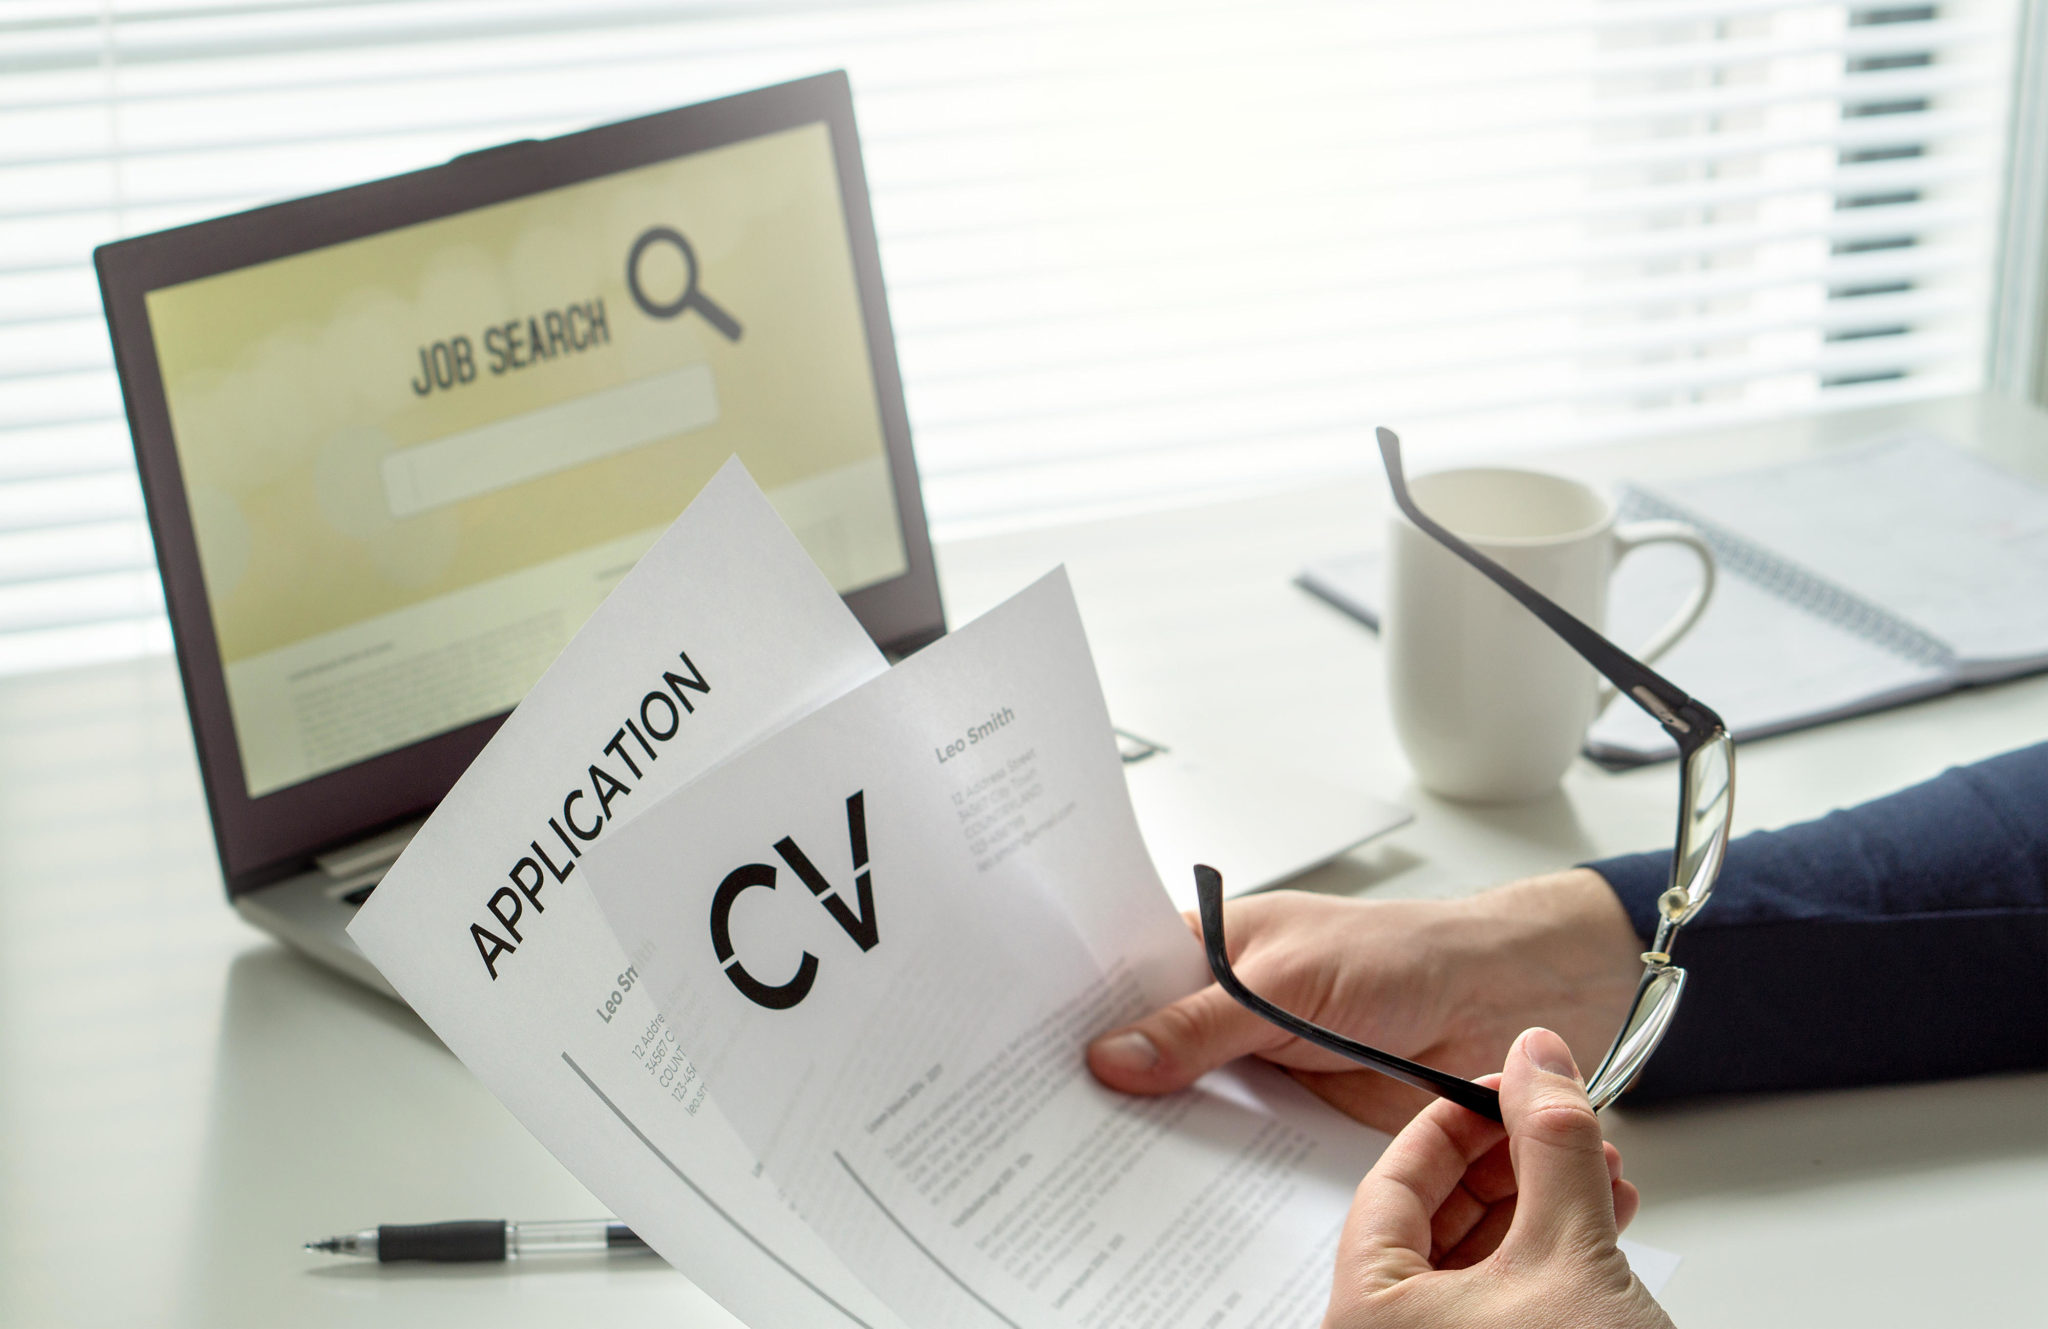 A job seeker is seen in a home office with a CV and job application form.